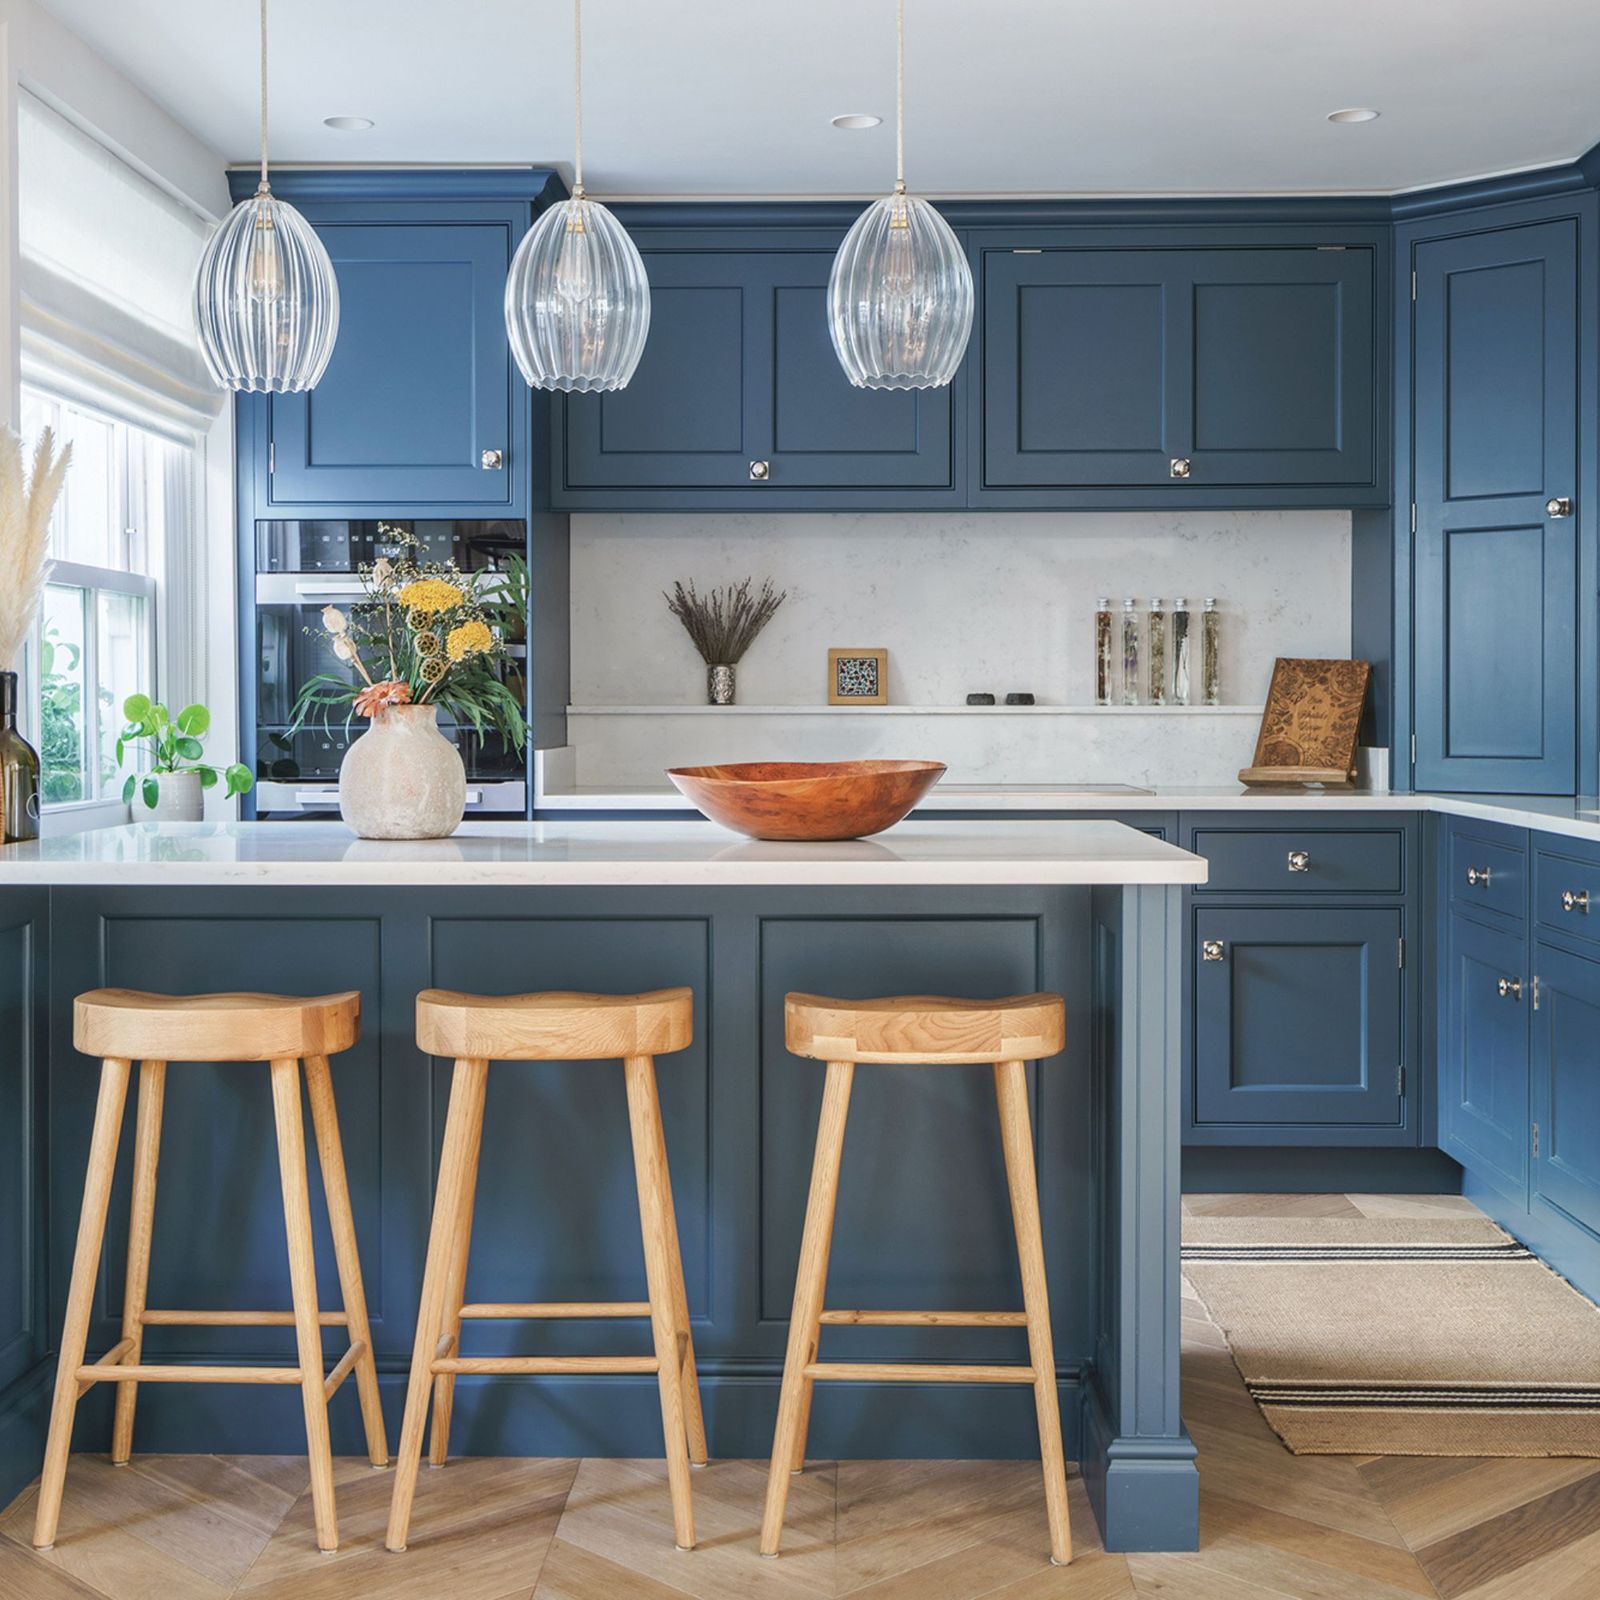 35 kitchen lighting ideas to make your space shine | Ideal Home